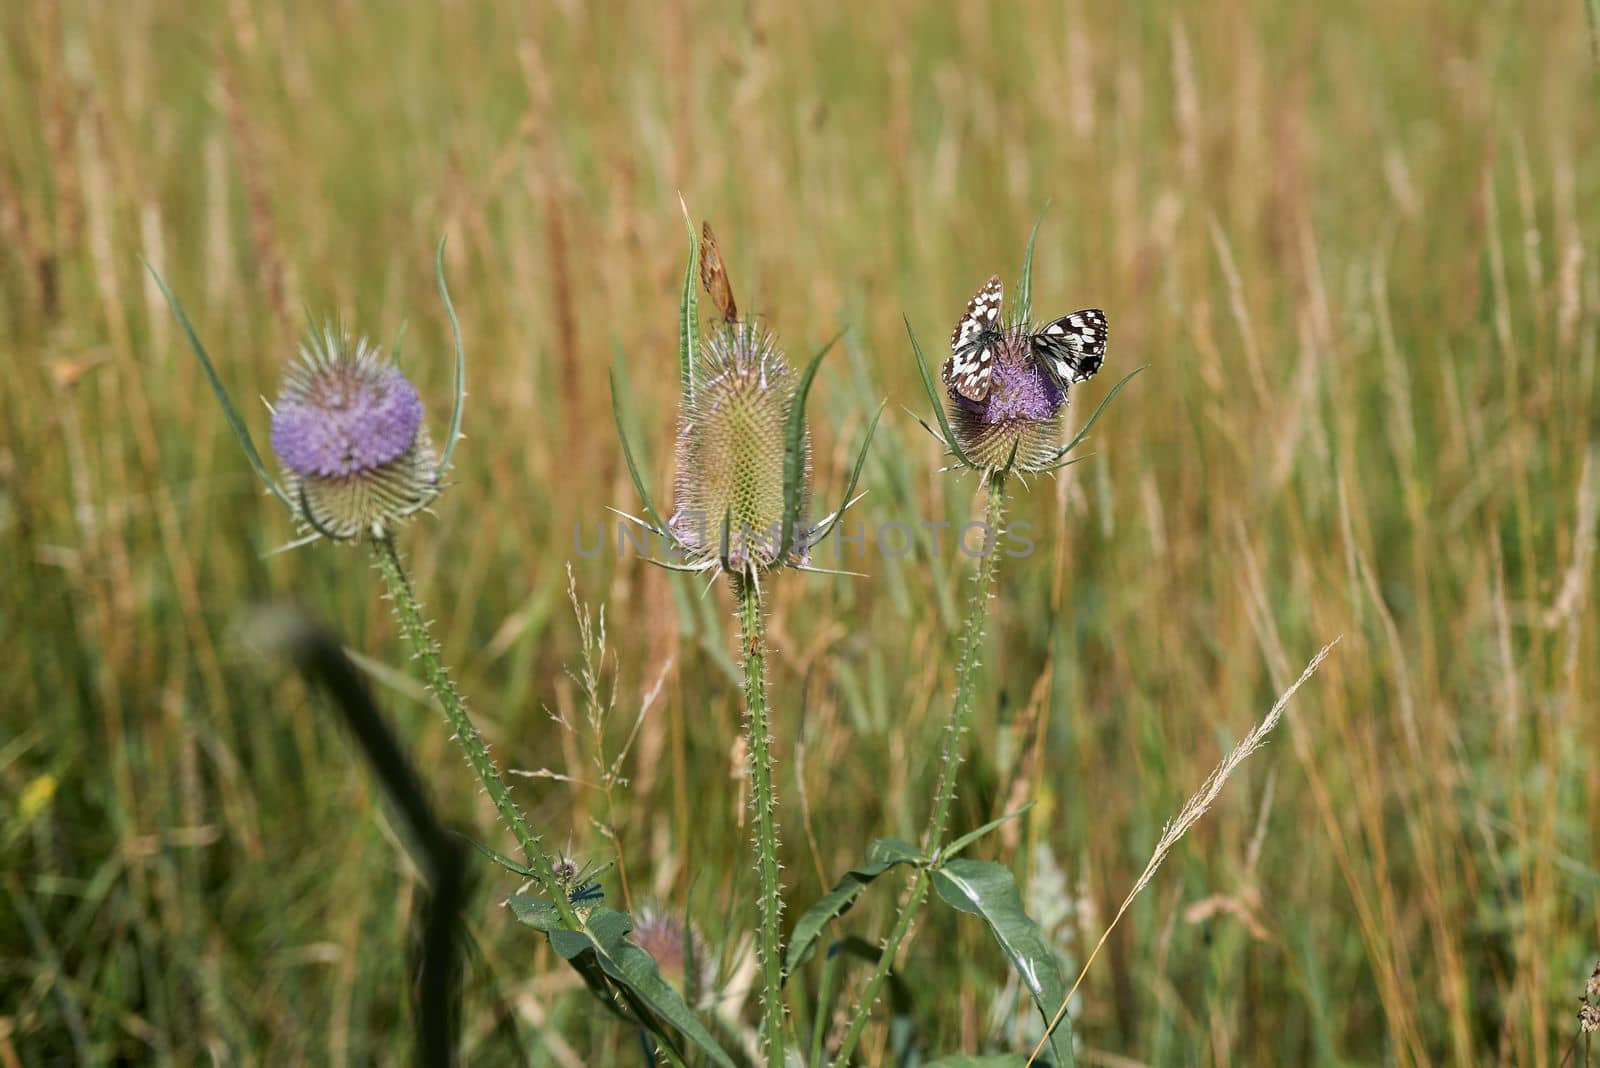 Three beautiful butterflies supplies themselves with the vital nectar on two pink flowering thistles.